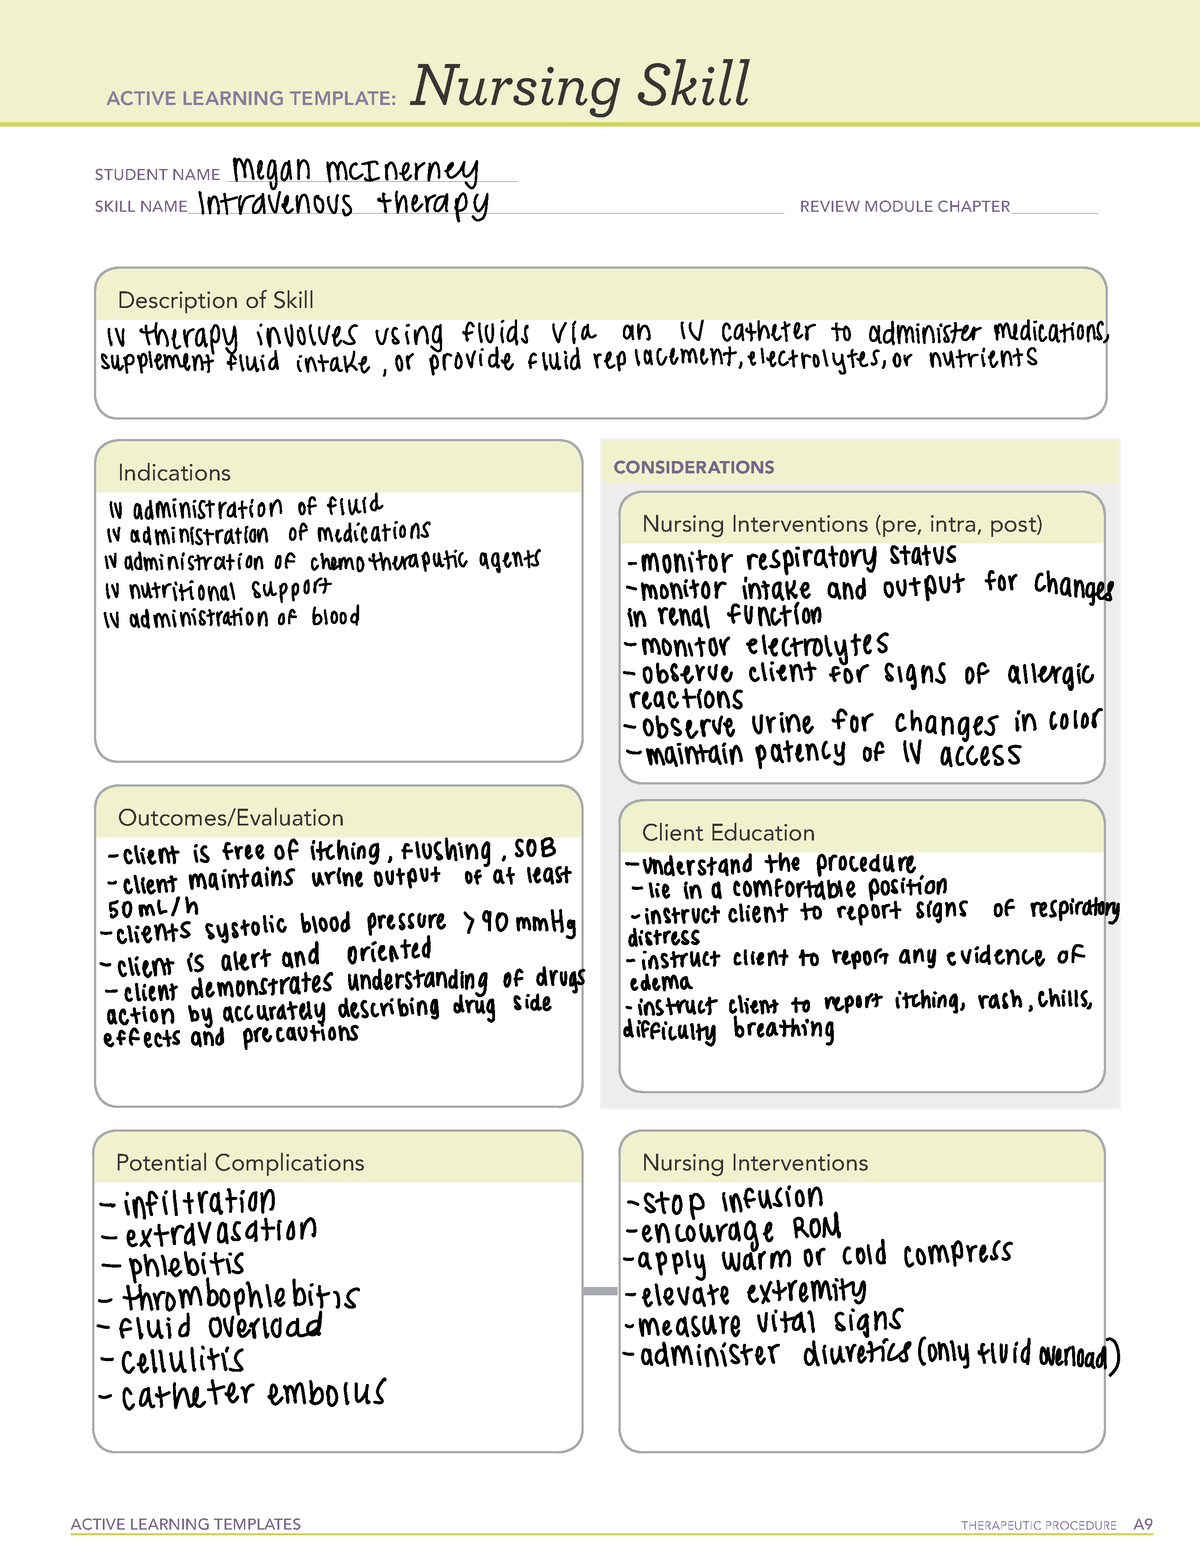 Active Learning Template IV Therapy ACTIVE LEARNING TEMPLATES